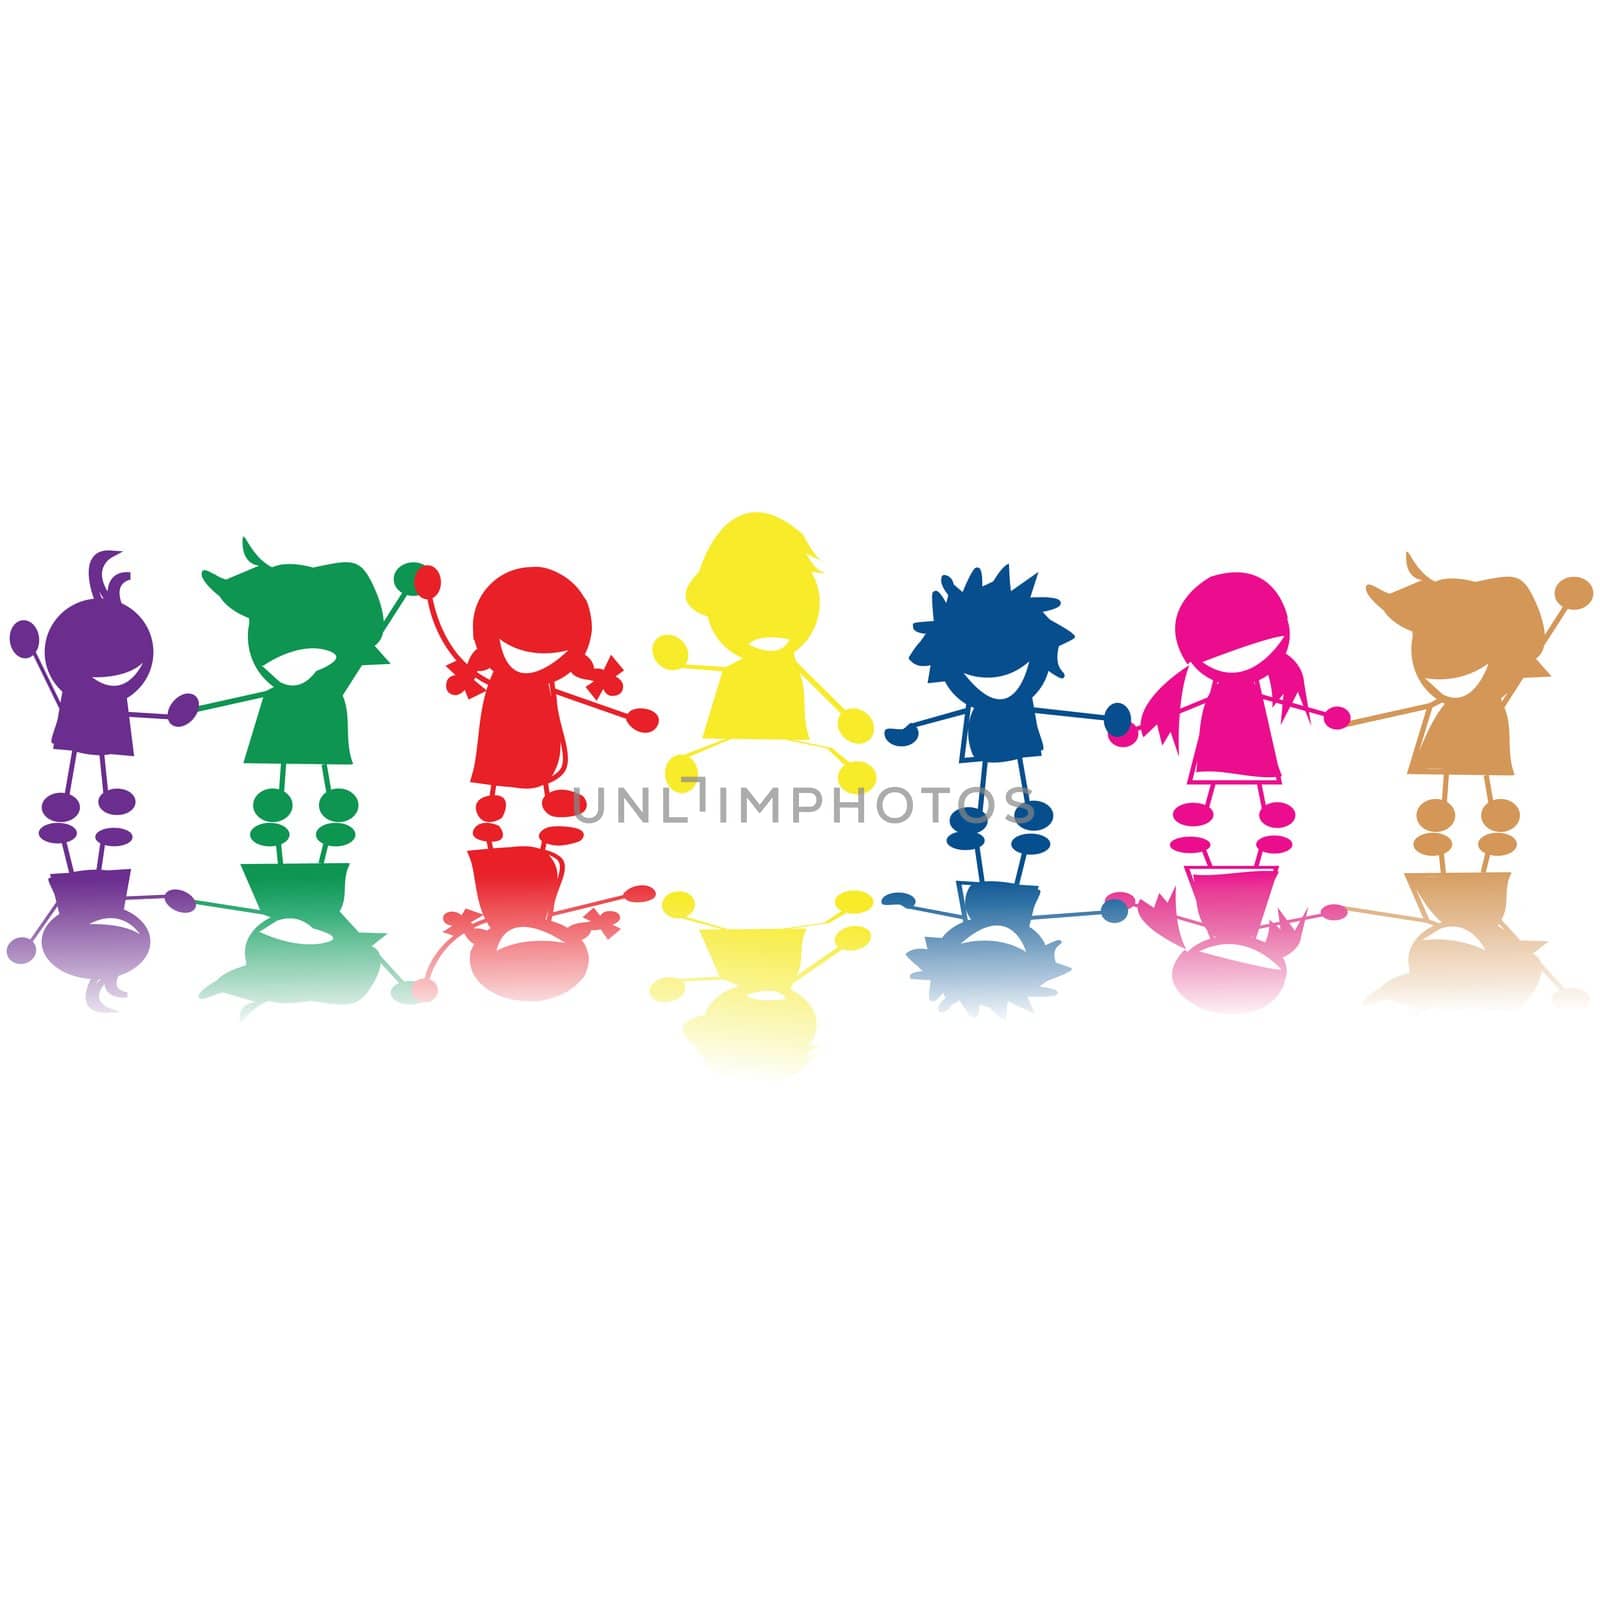 Silhouettes of children in colors and races holding hands